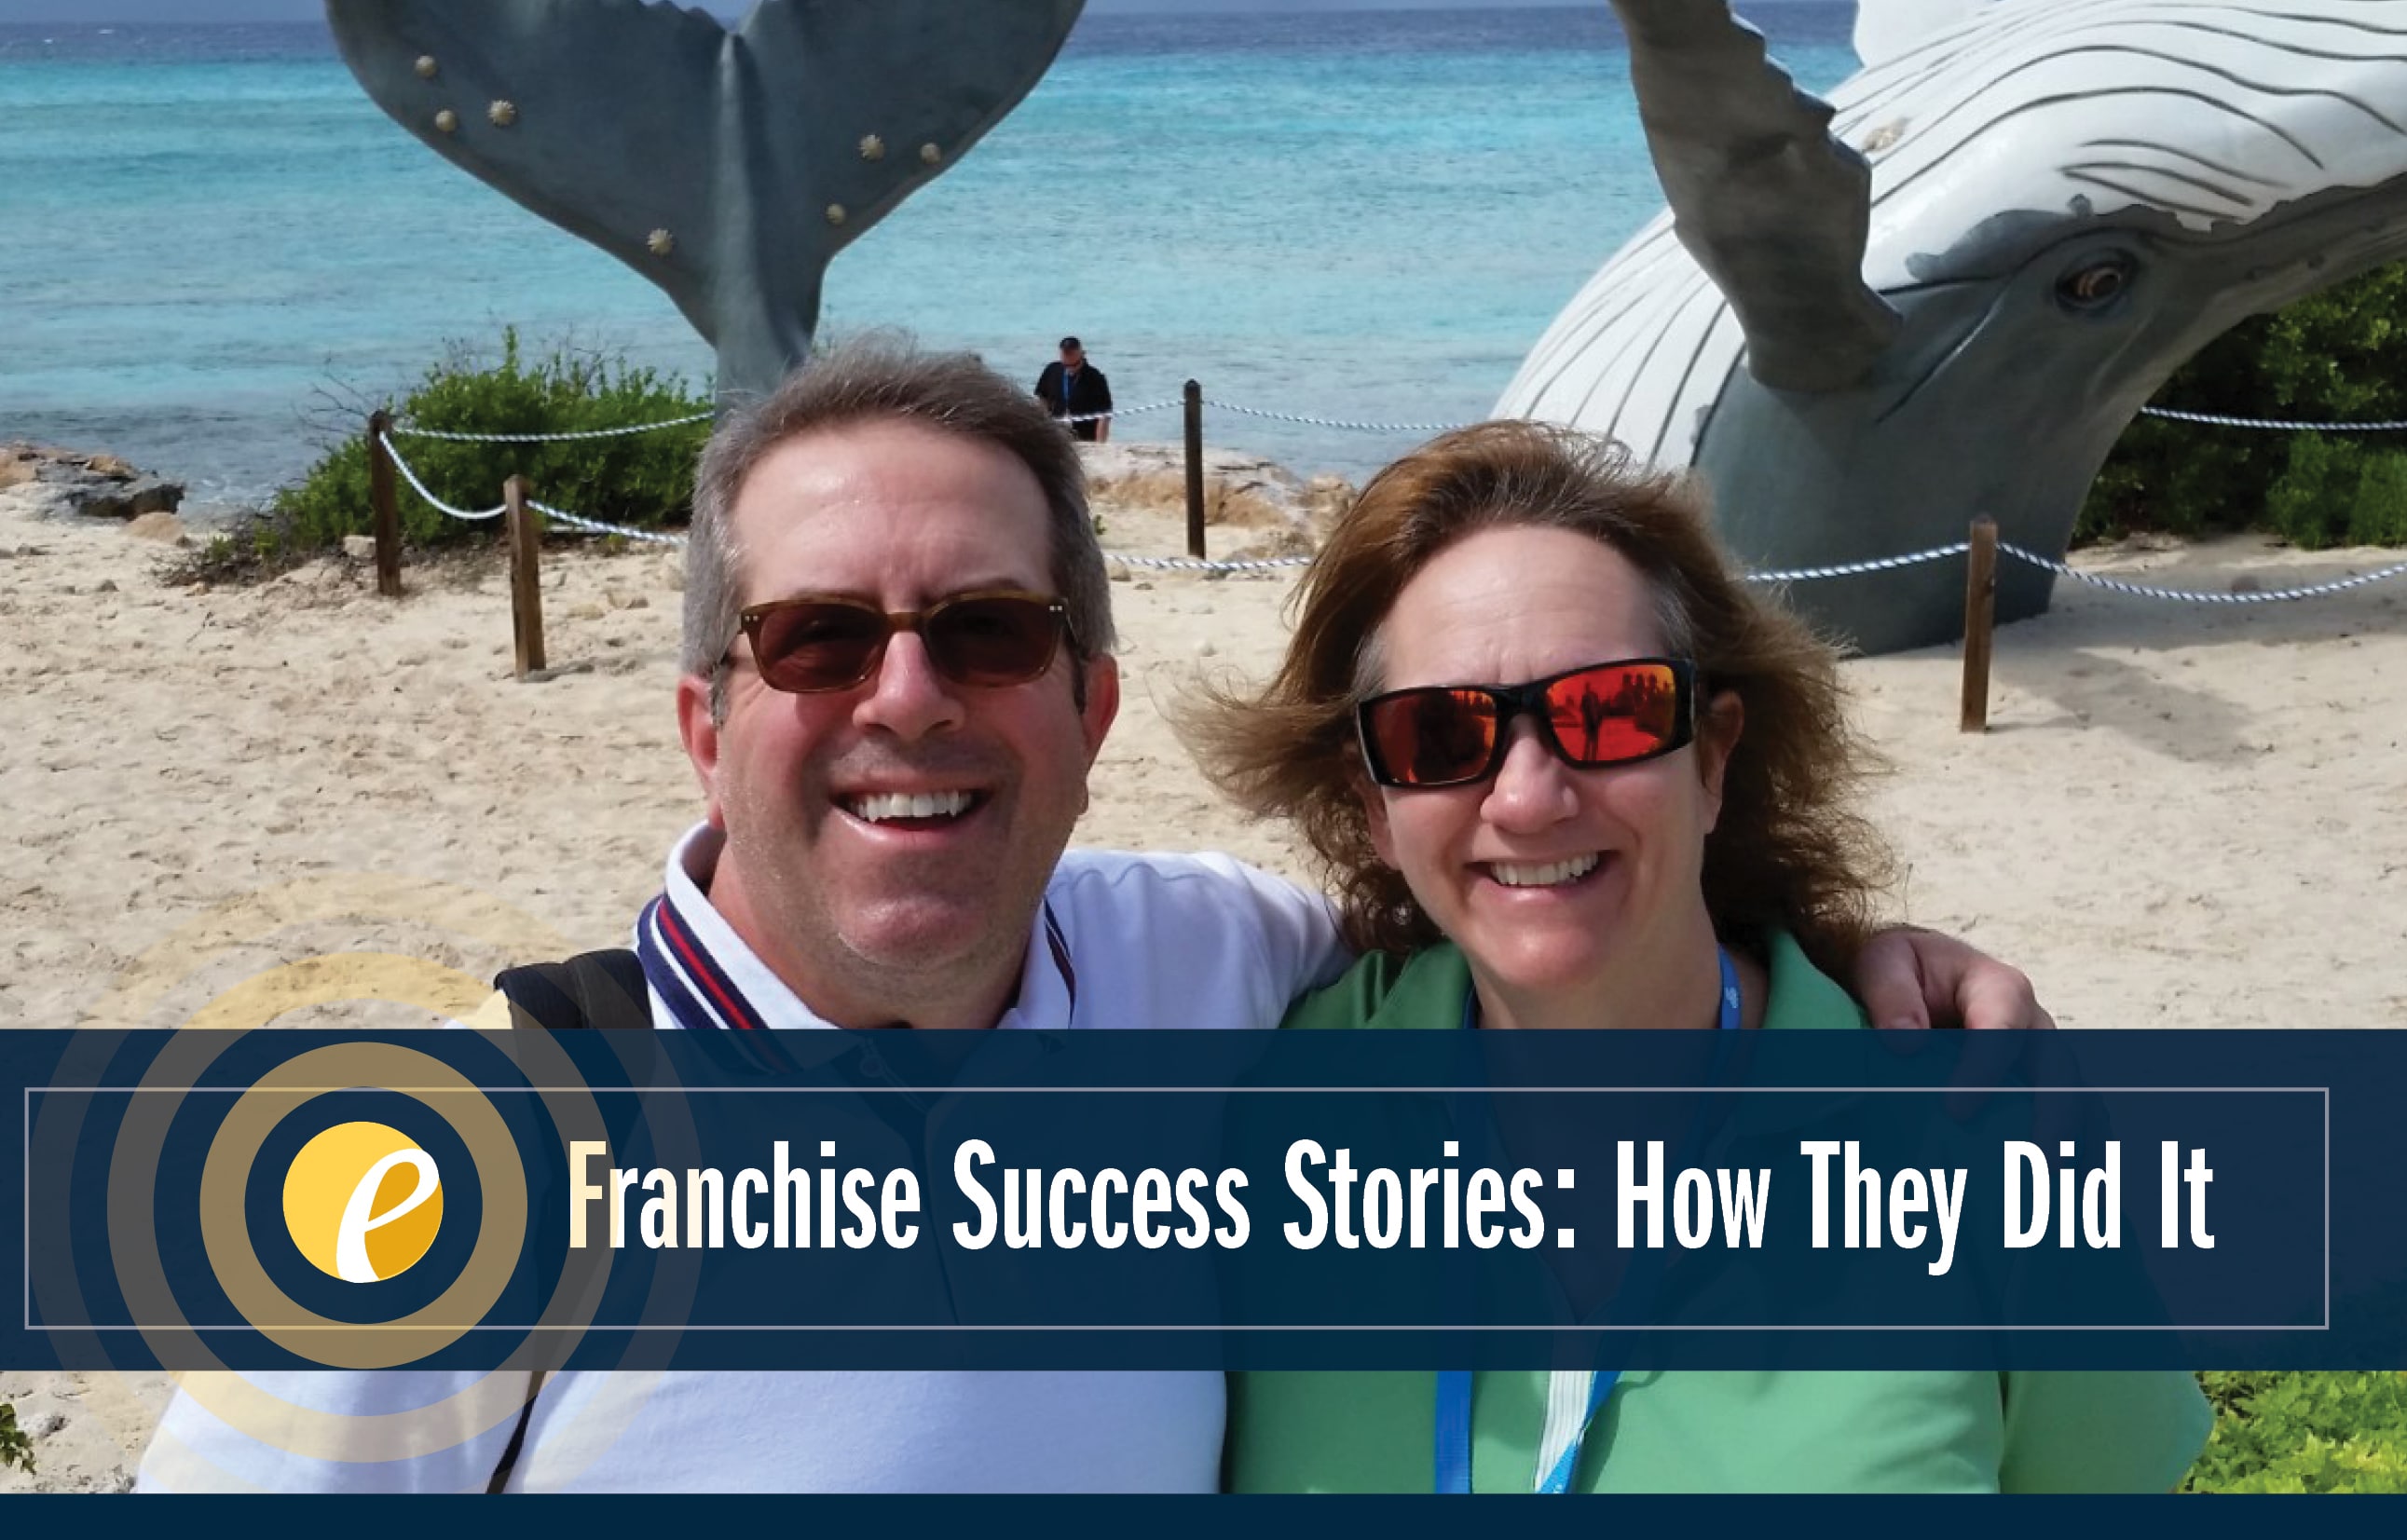 photo of smiling woman and man on a beach with Franchise Success Stories: How They Did It text